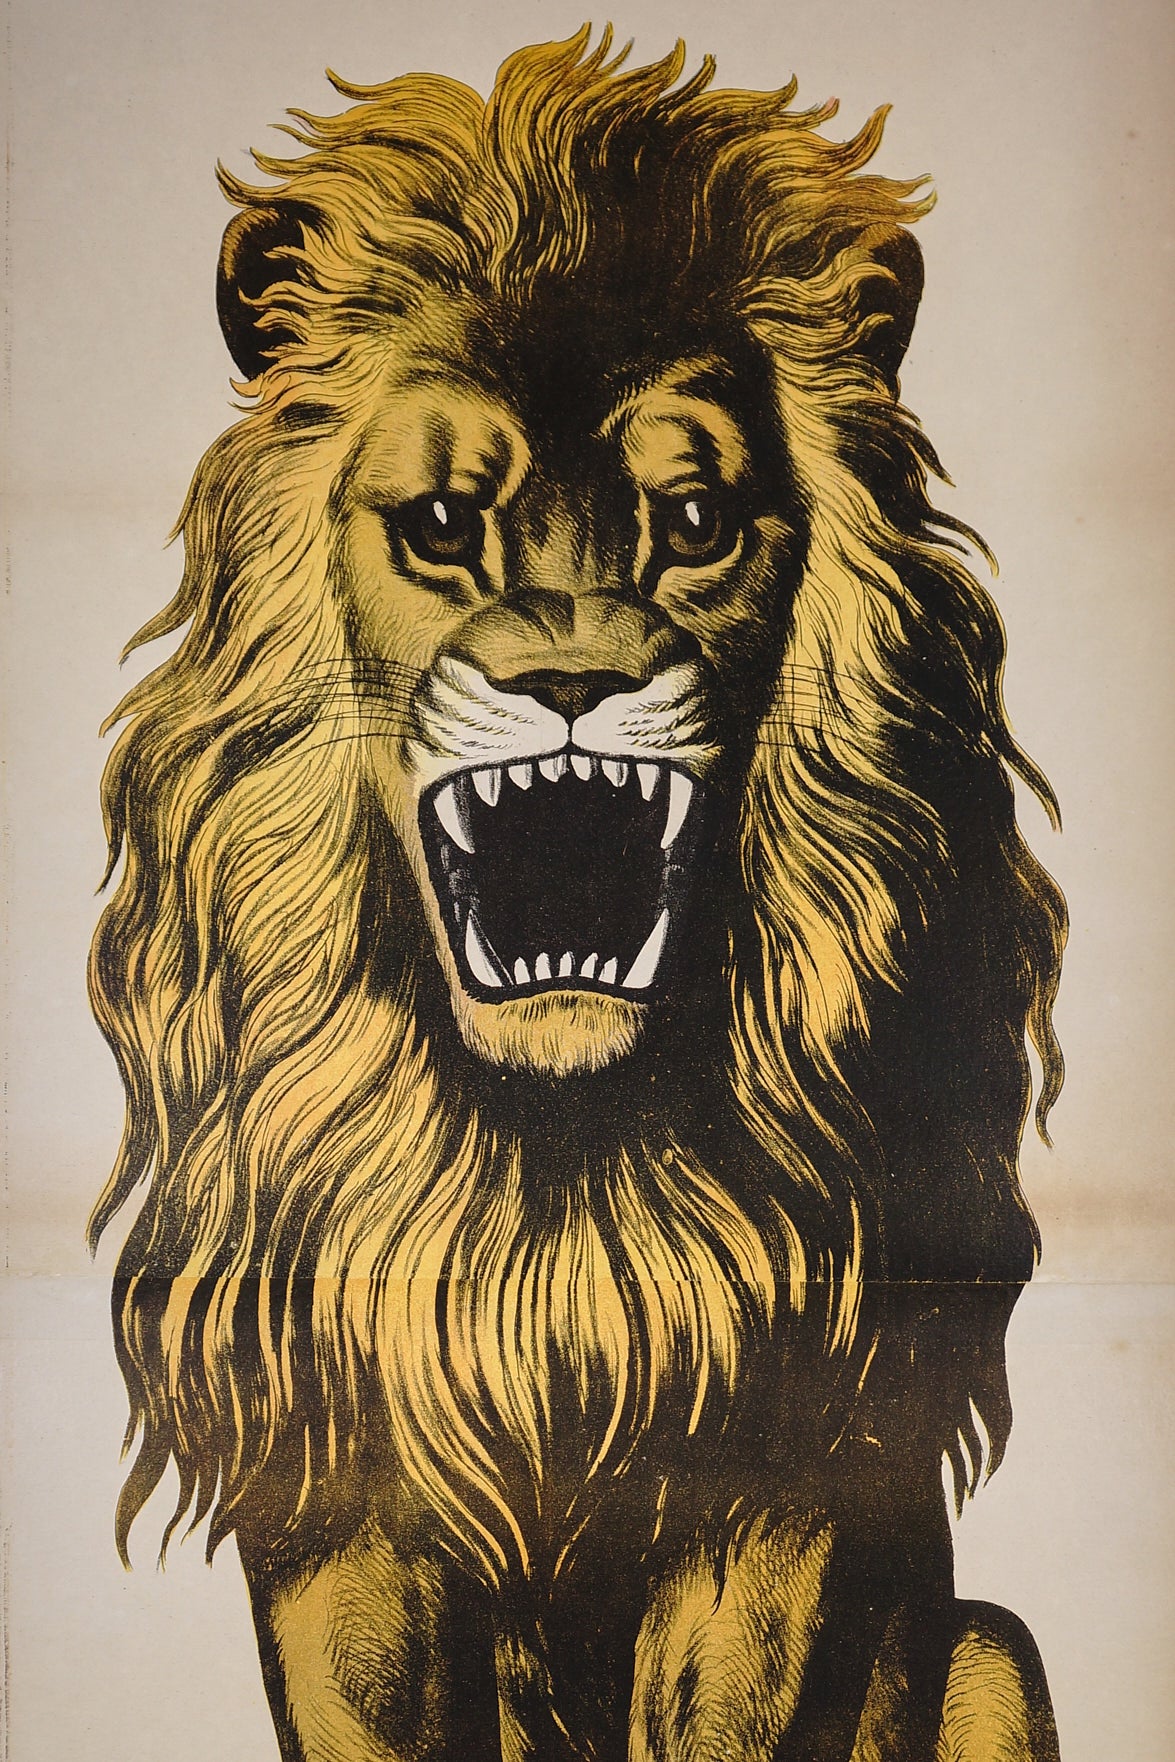 Wissembourg Lion N202 - Authentic Vintage Poster